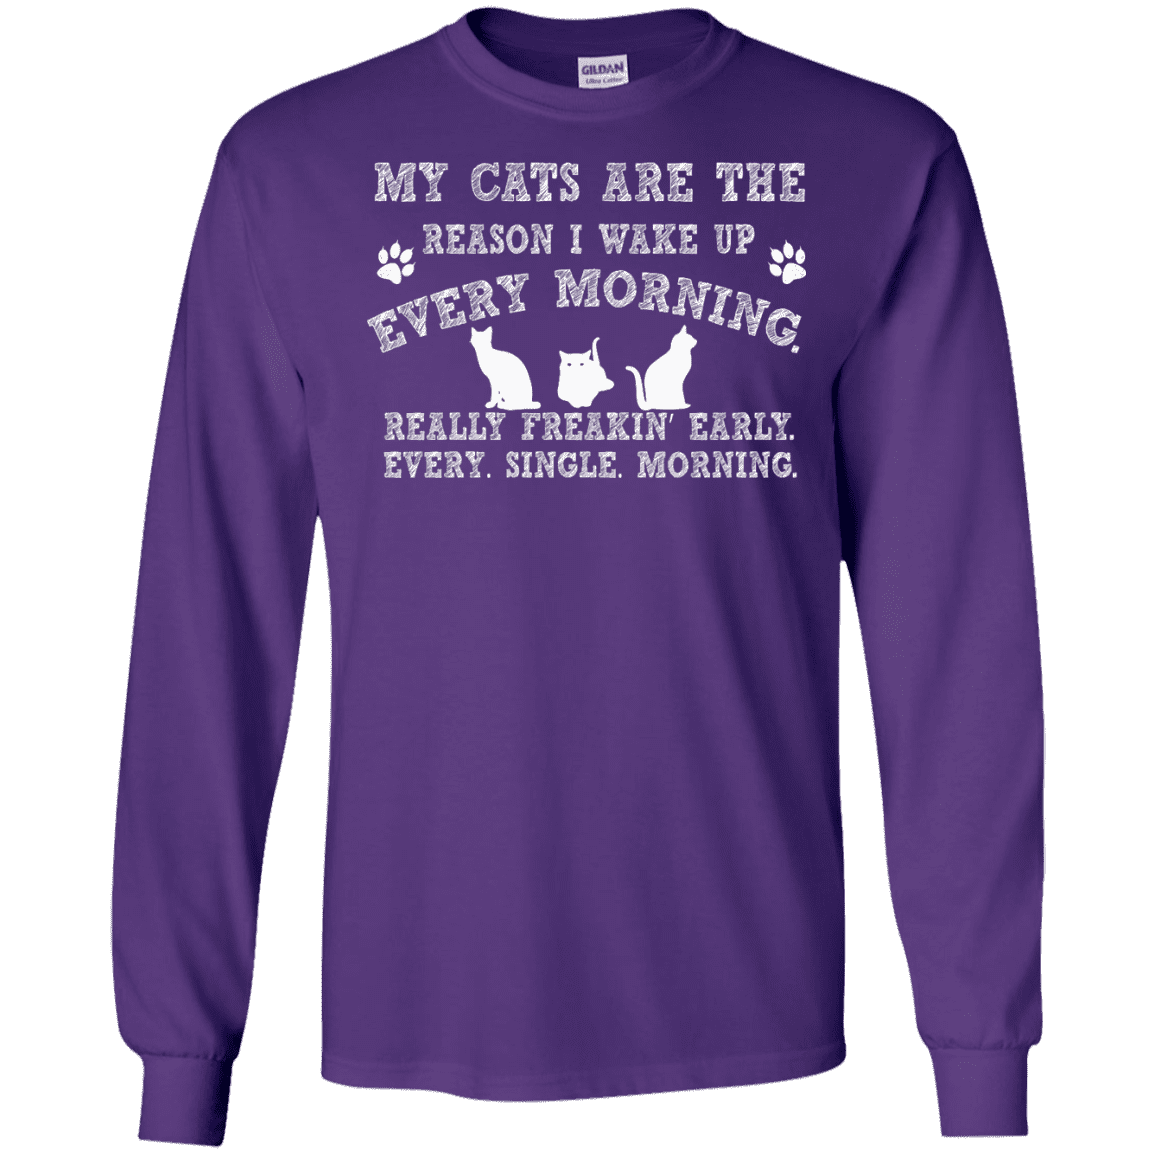 My Cats Are The Reason - Long Sleeve T Shirt.